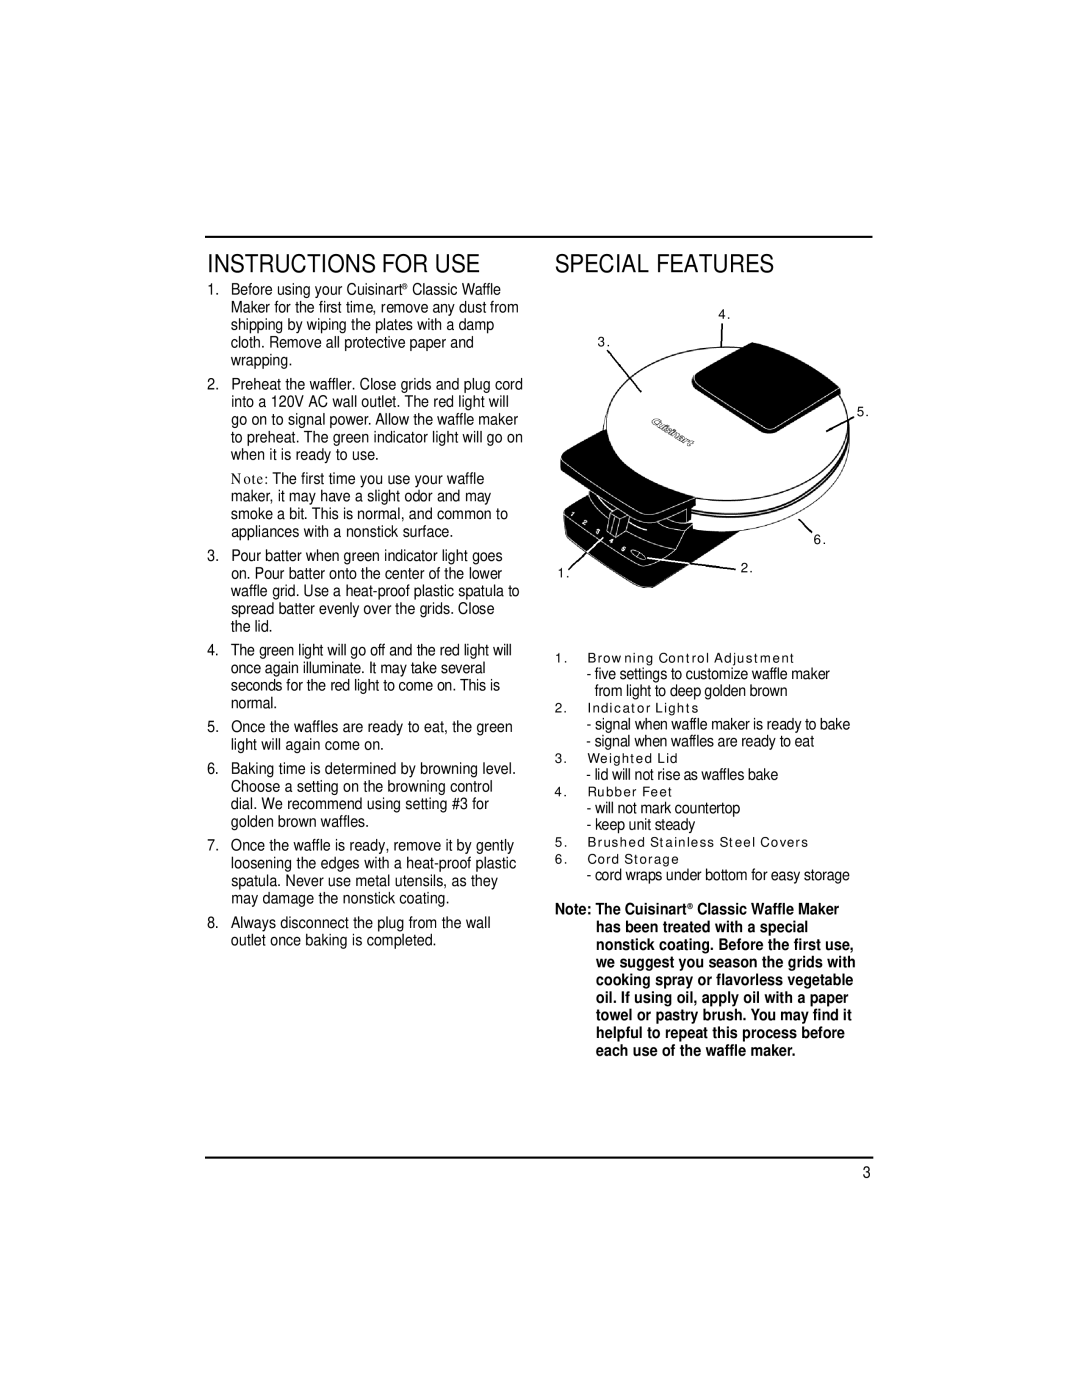 Cuisinart WMR-CA manual Instructions For Use, Special Features 